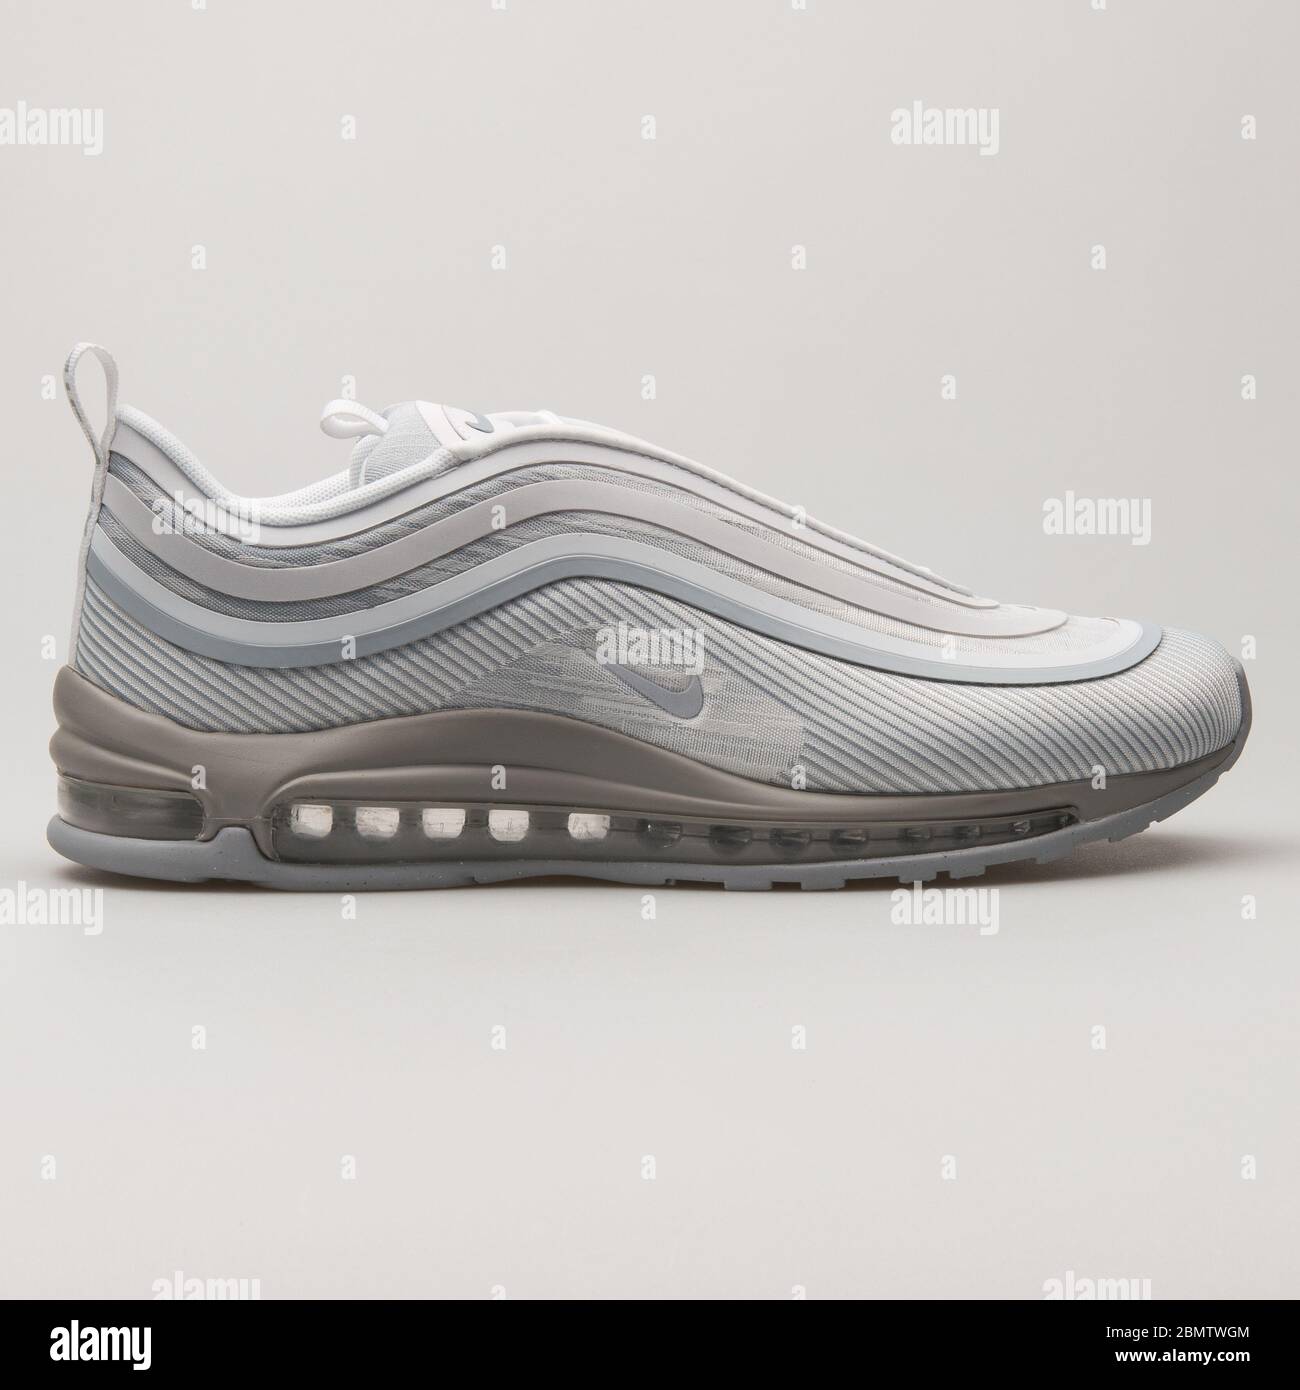 Nike air max 97 High Resolution Stock Photography and Images - Alamy